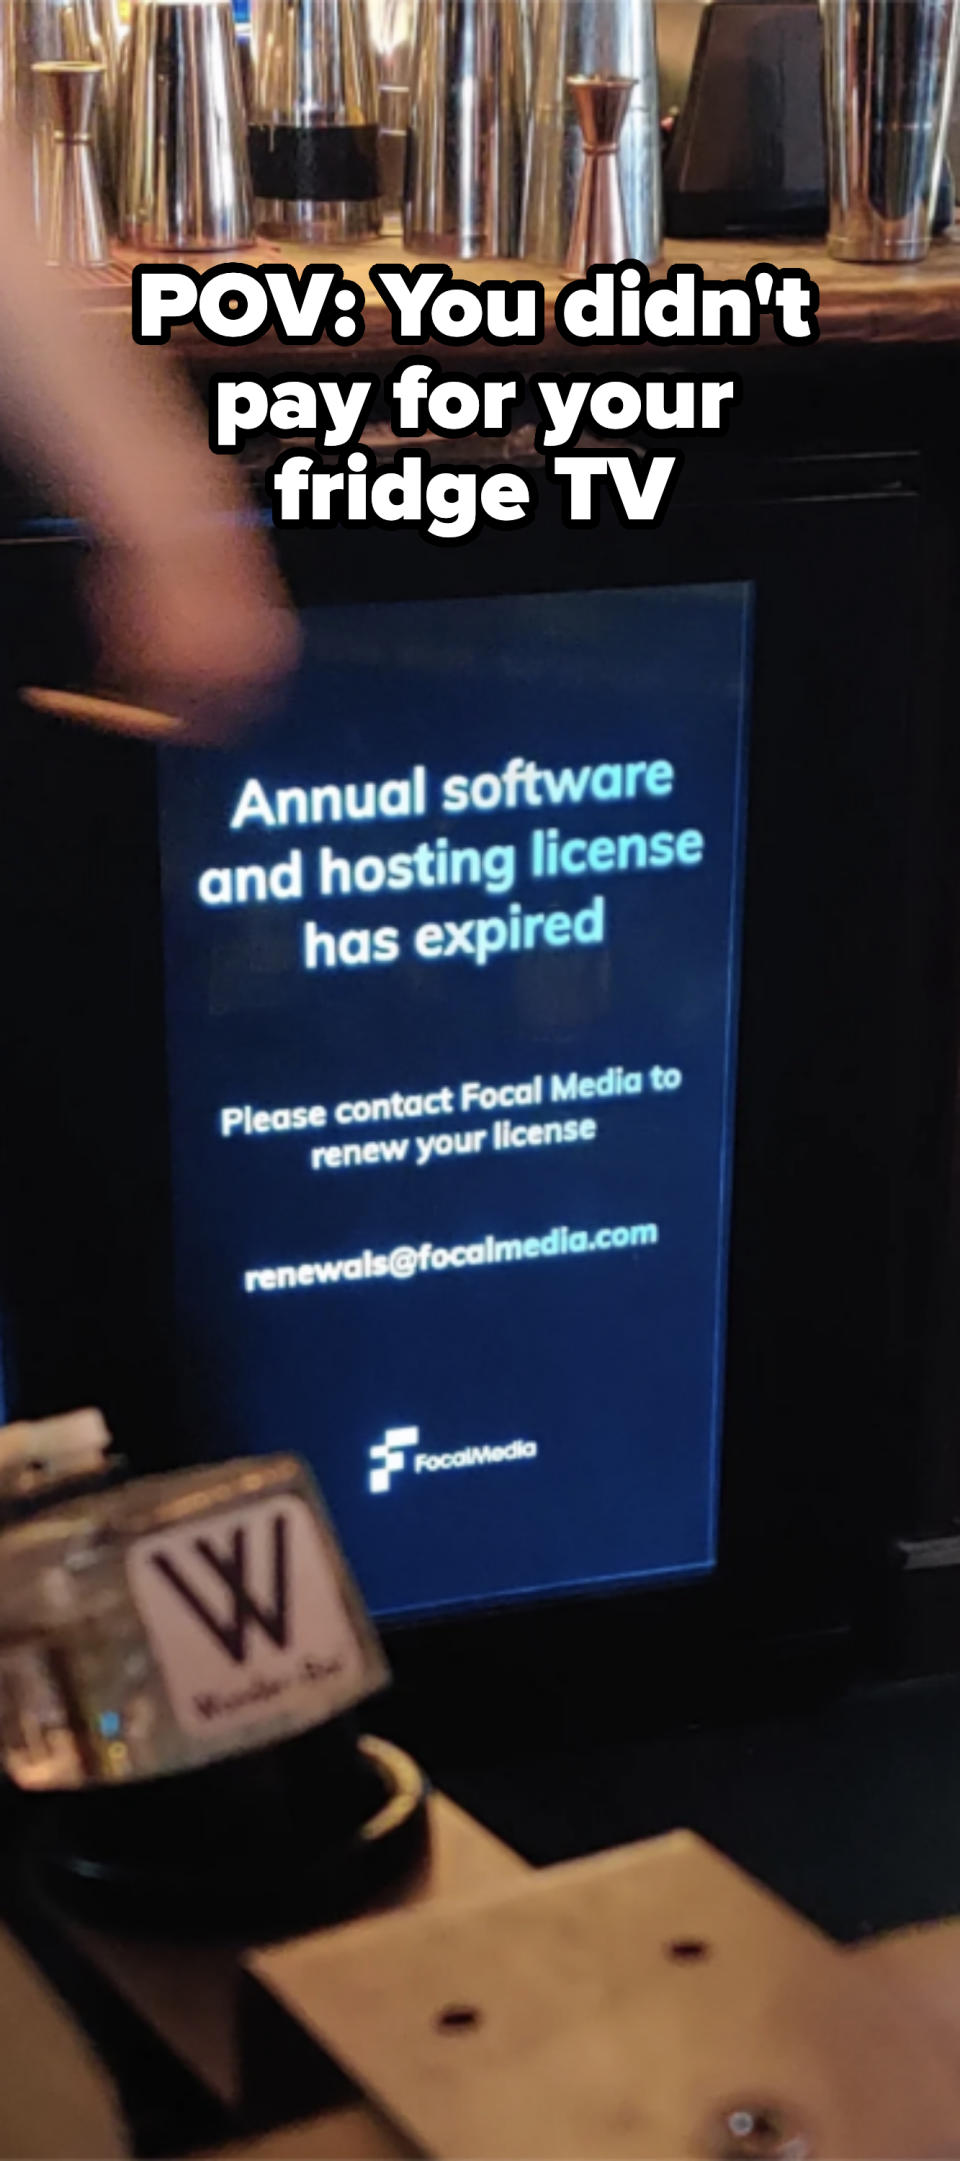 Digital screen reads, "Annual software and hosting license has expired. Please contact Focal Media to renew your license renewals@focalmedia.com."